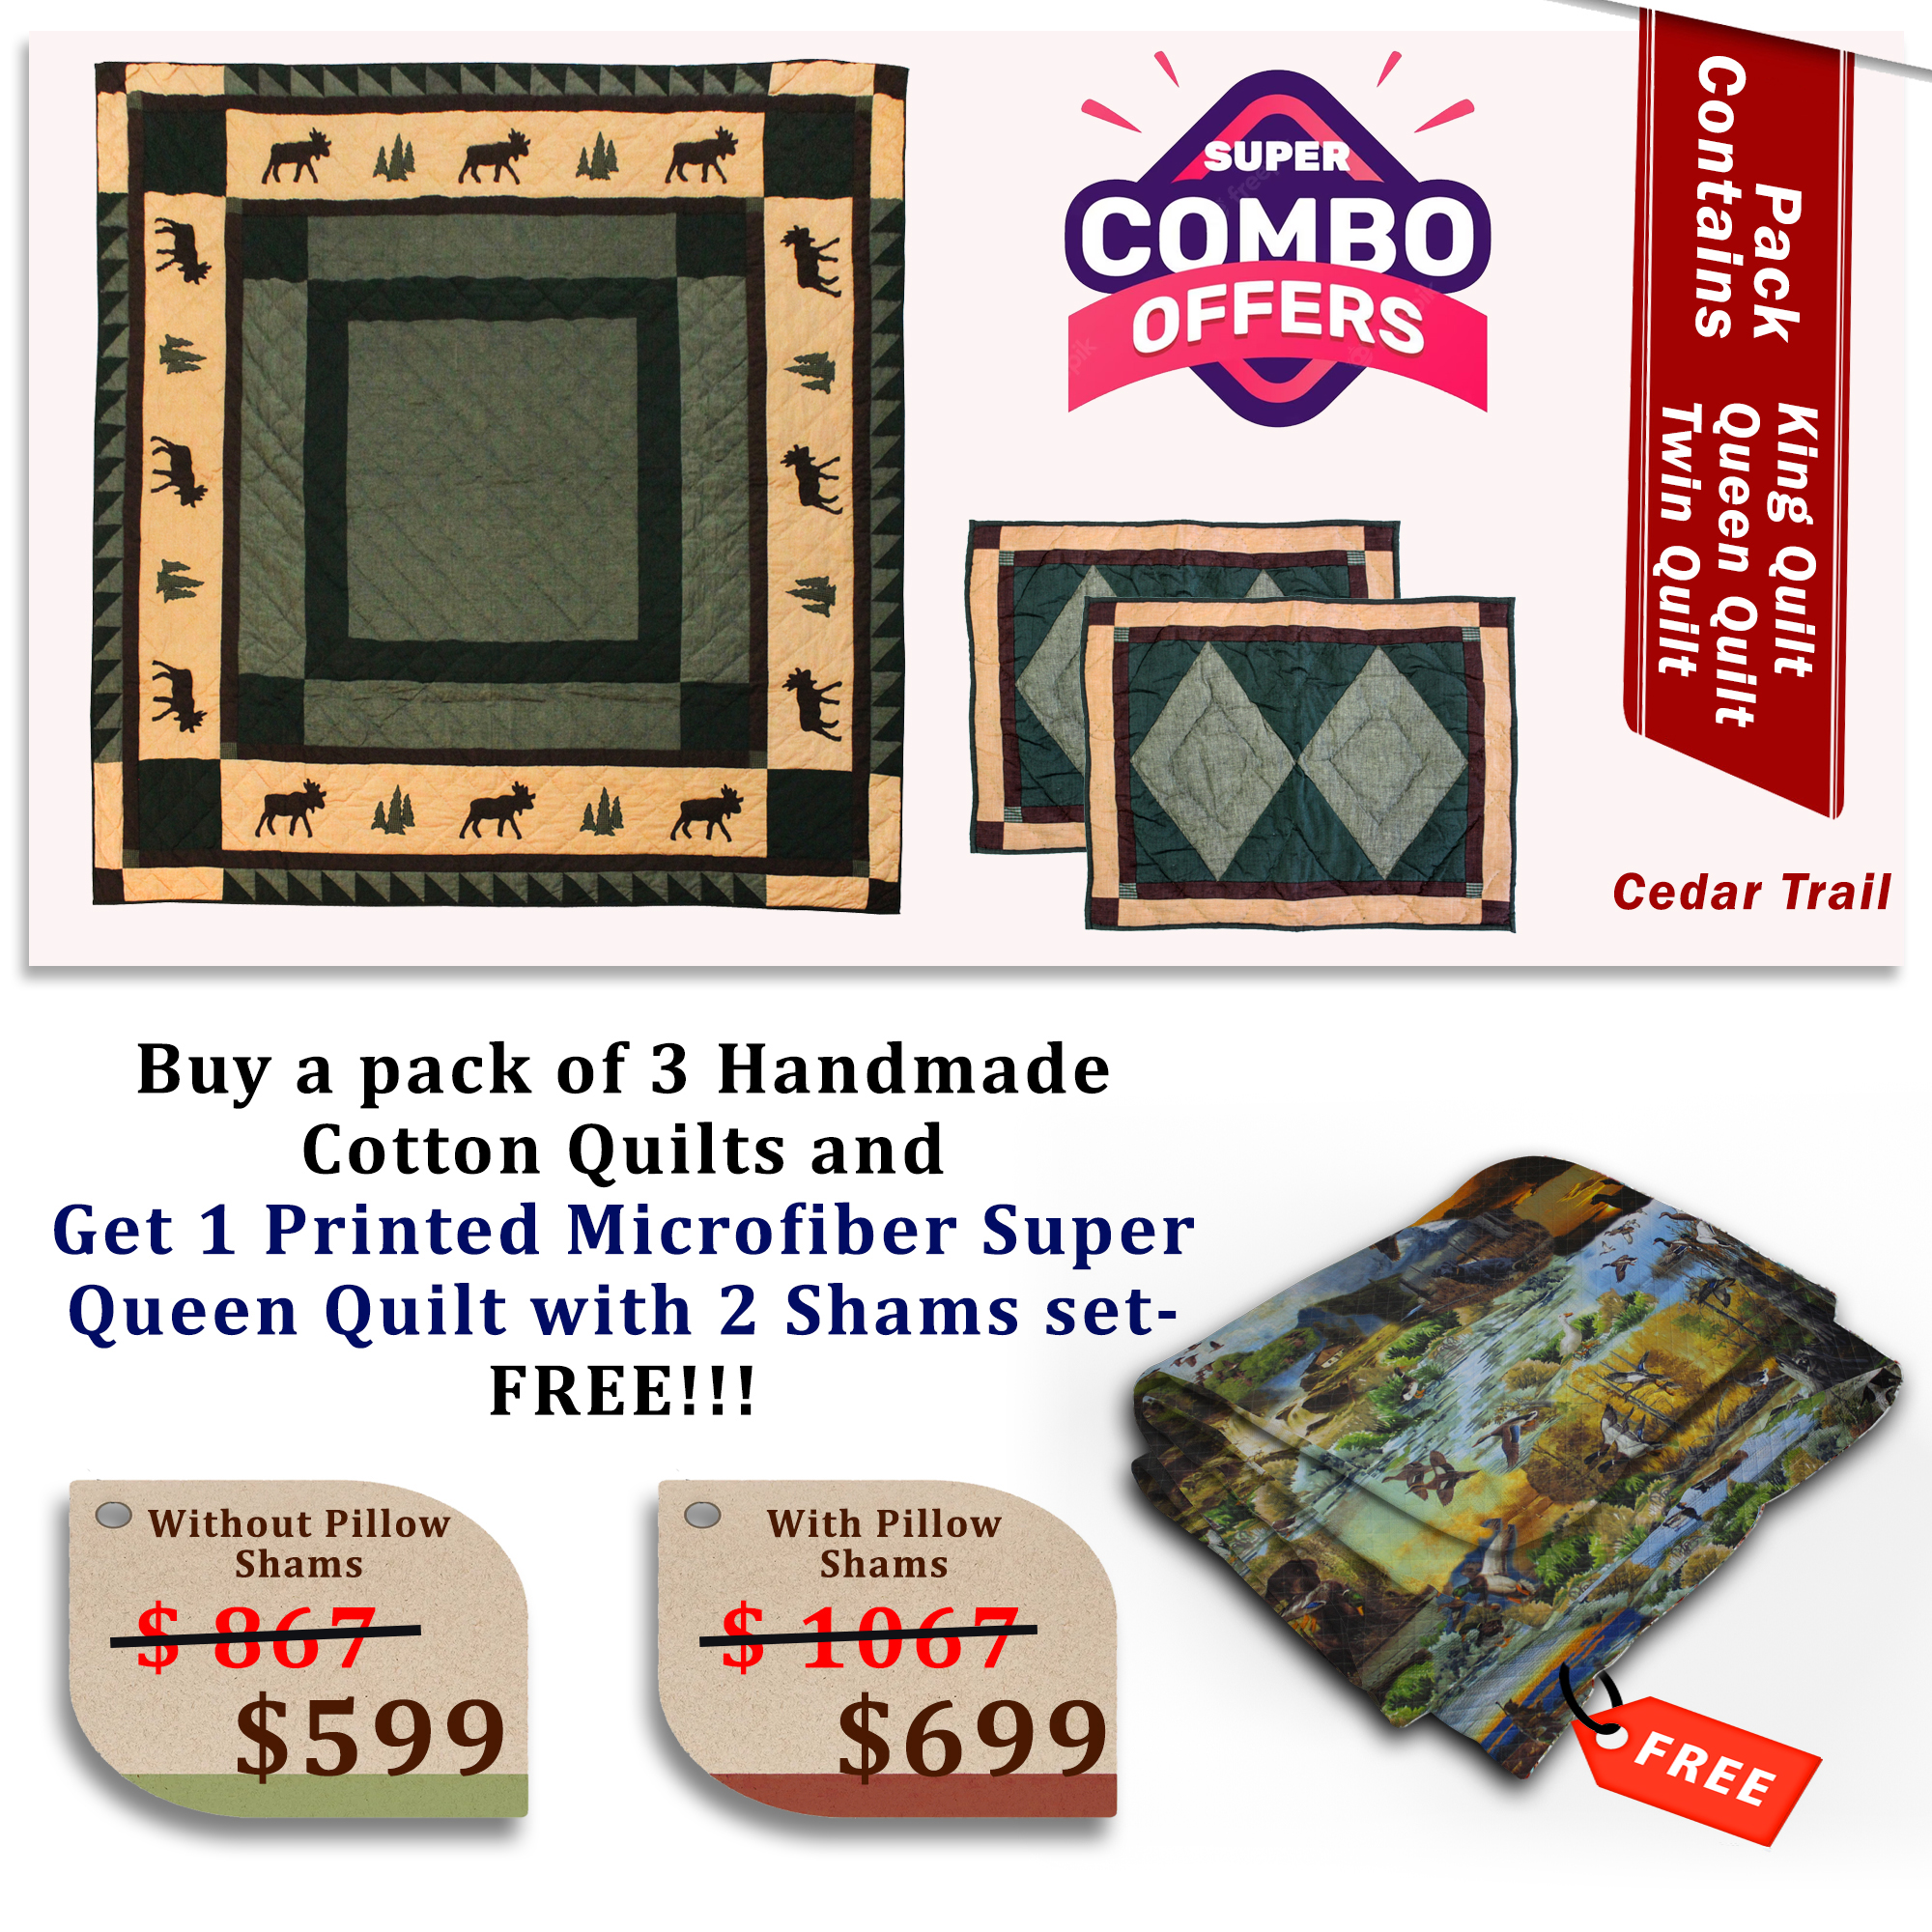 Cedar Trail - Handmade Cotton quilts | Buy 3 cotton quilts and get 1 Printed Microfiber Super Queen Quilt with 2 Shams set FREE